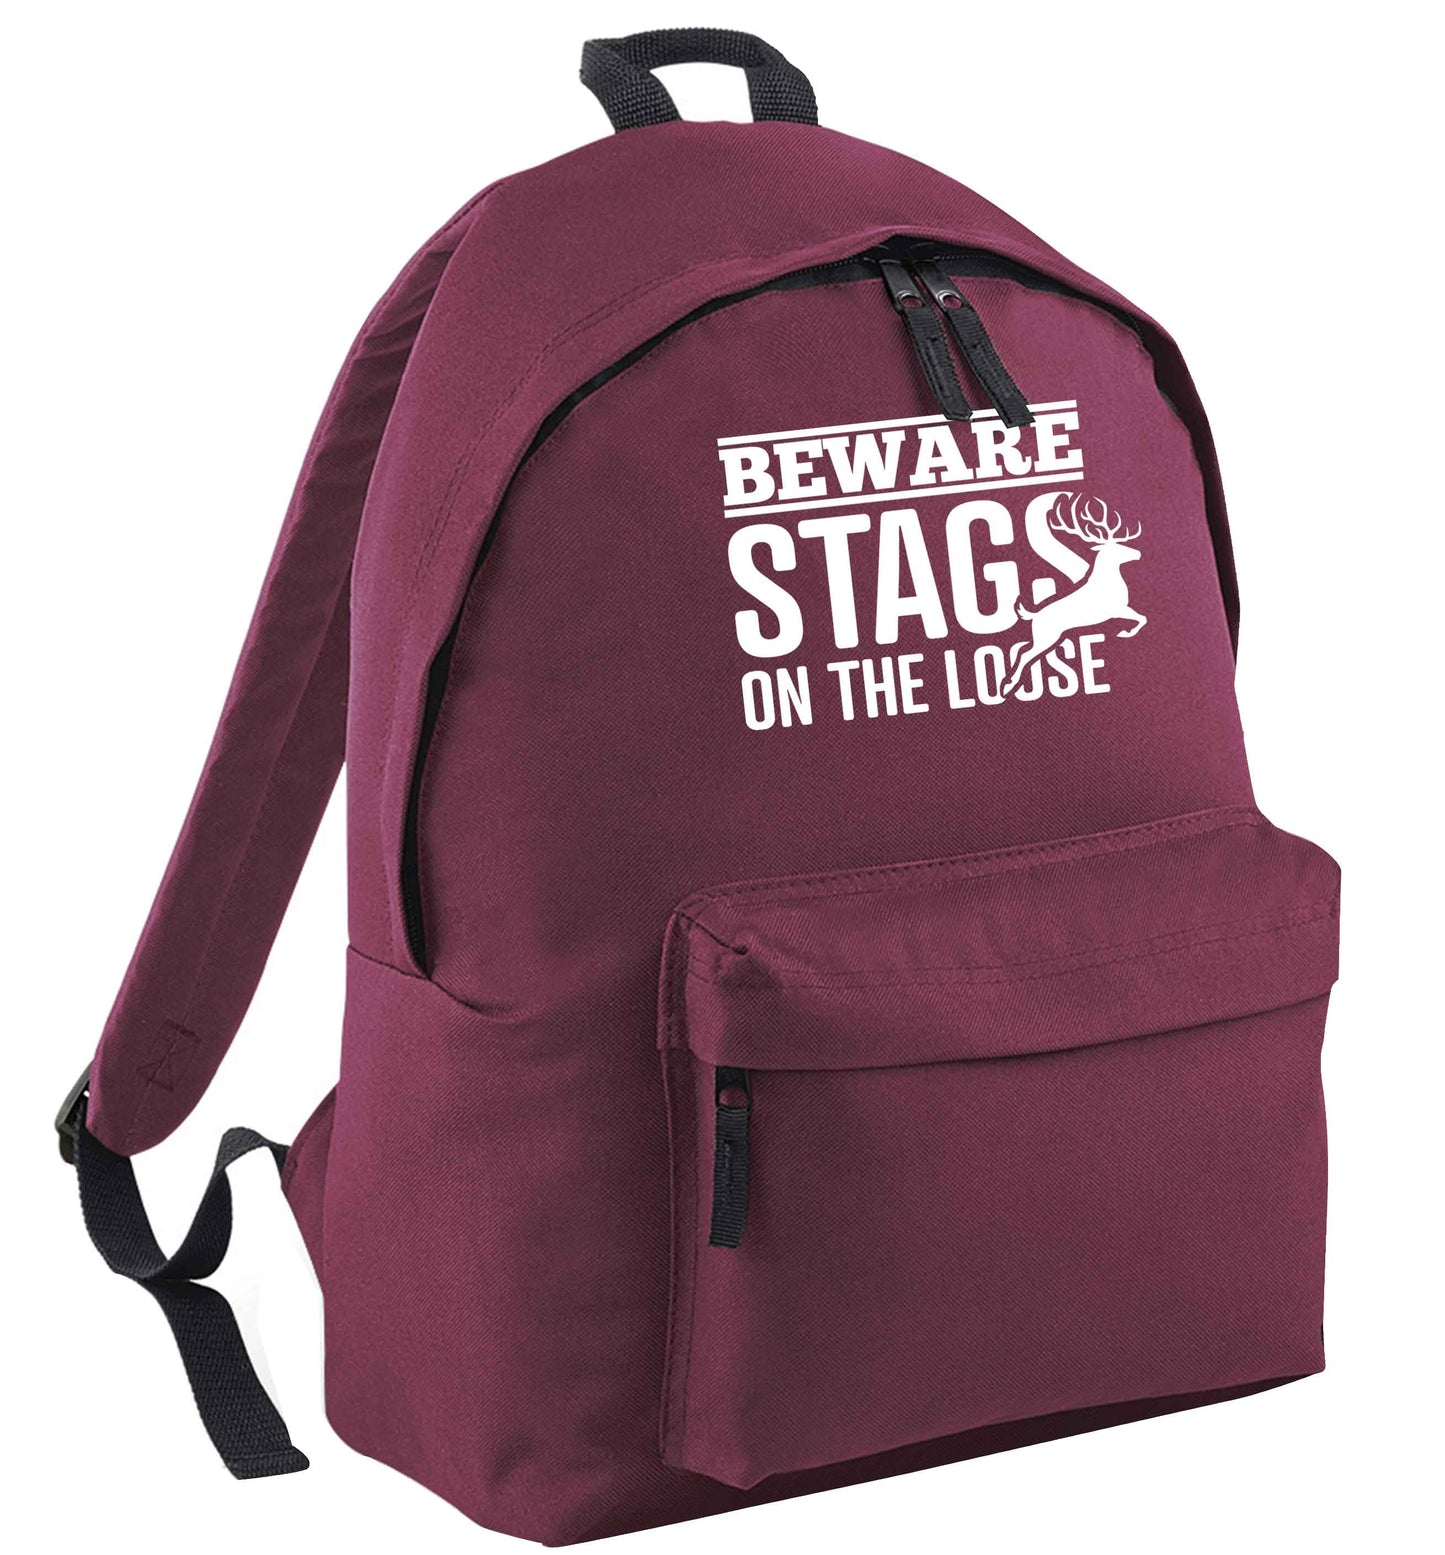 Beware stags on the loose maroon adults backpack